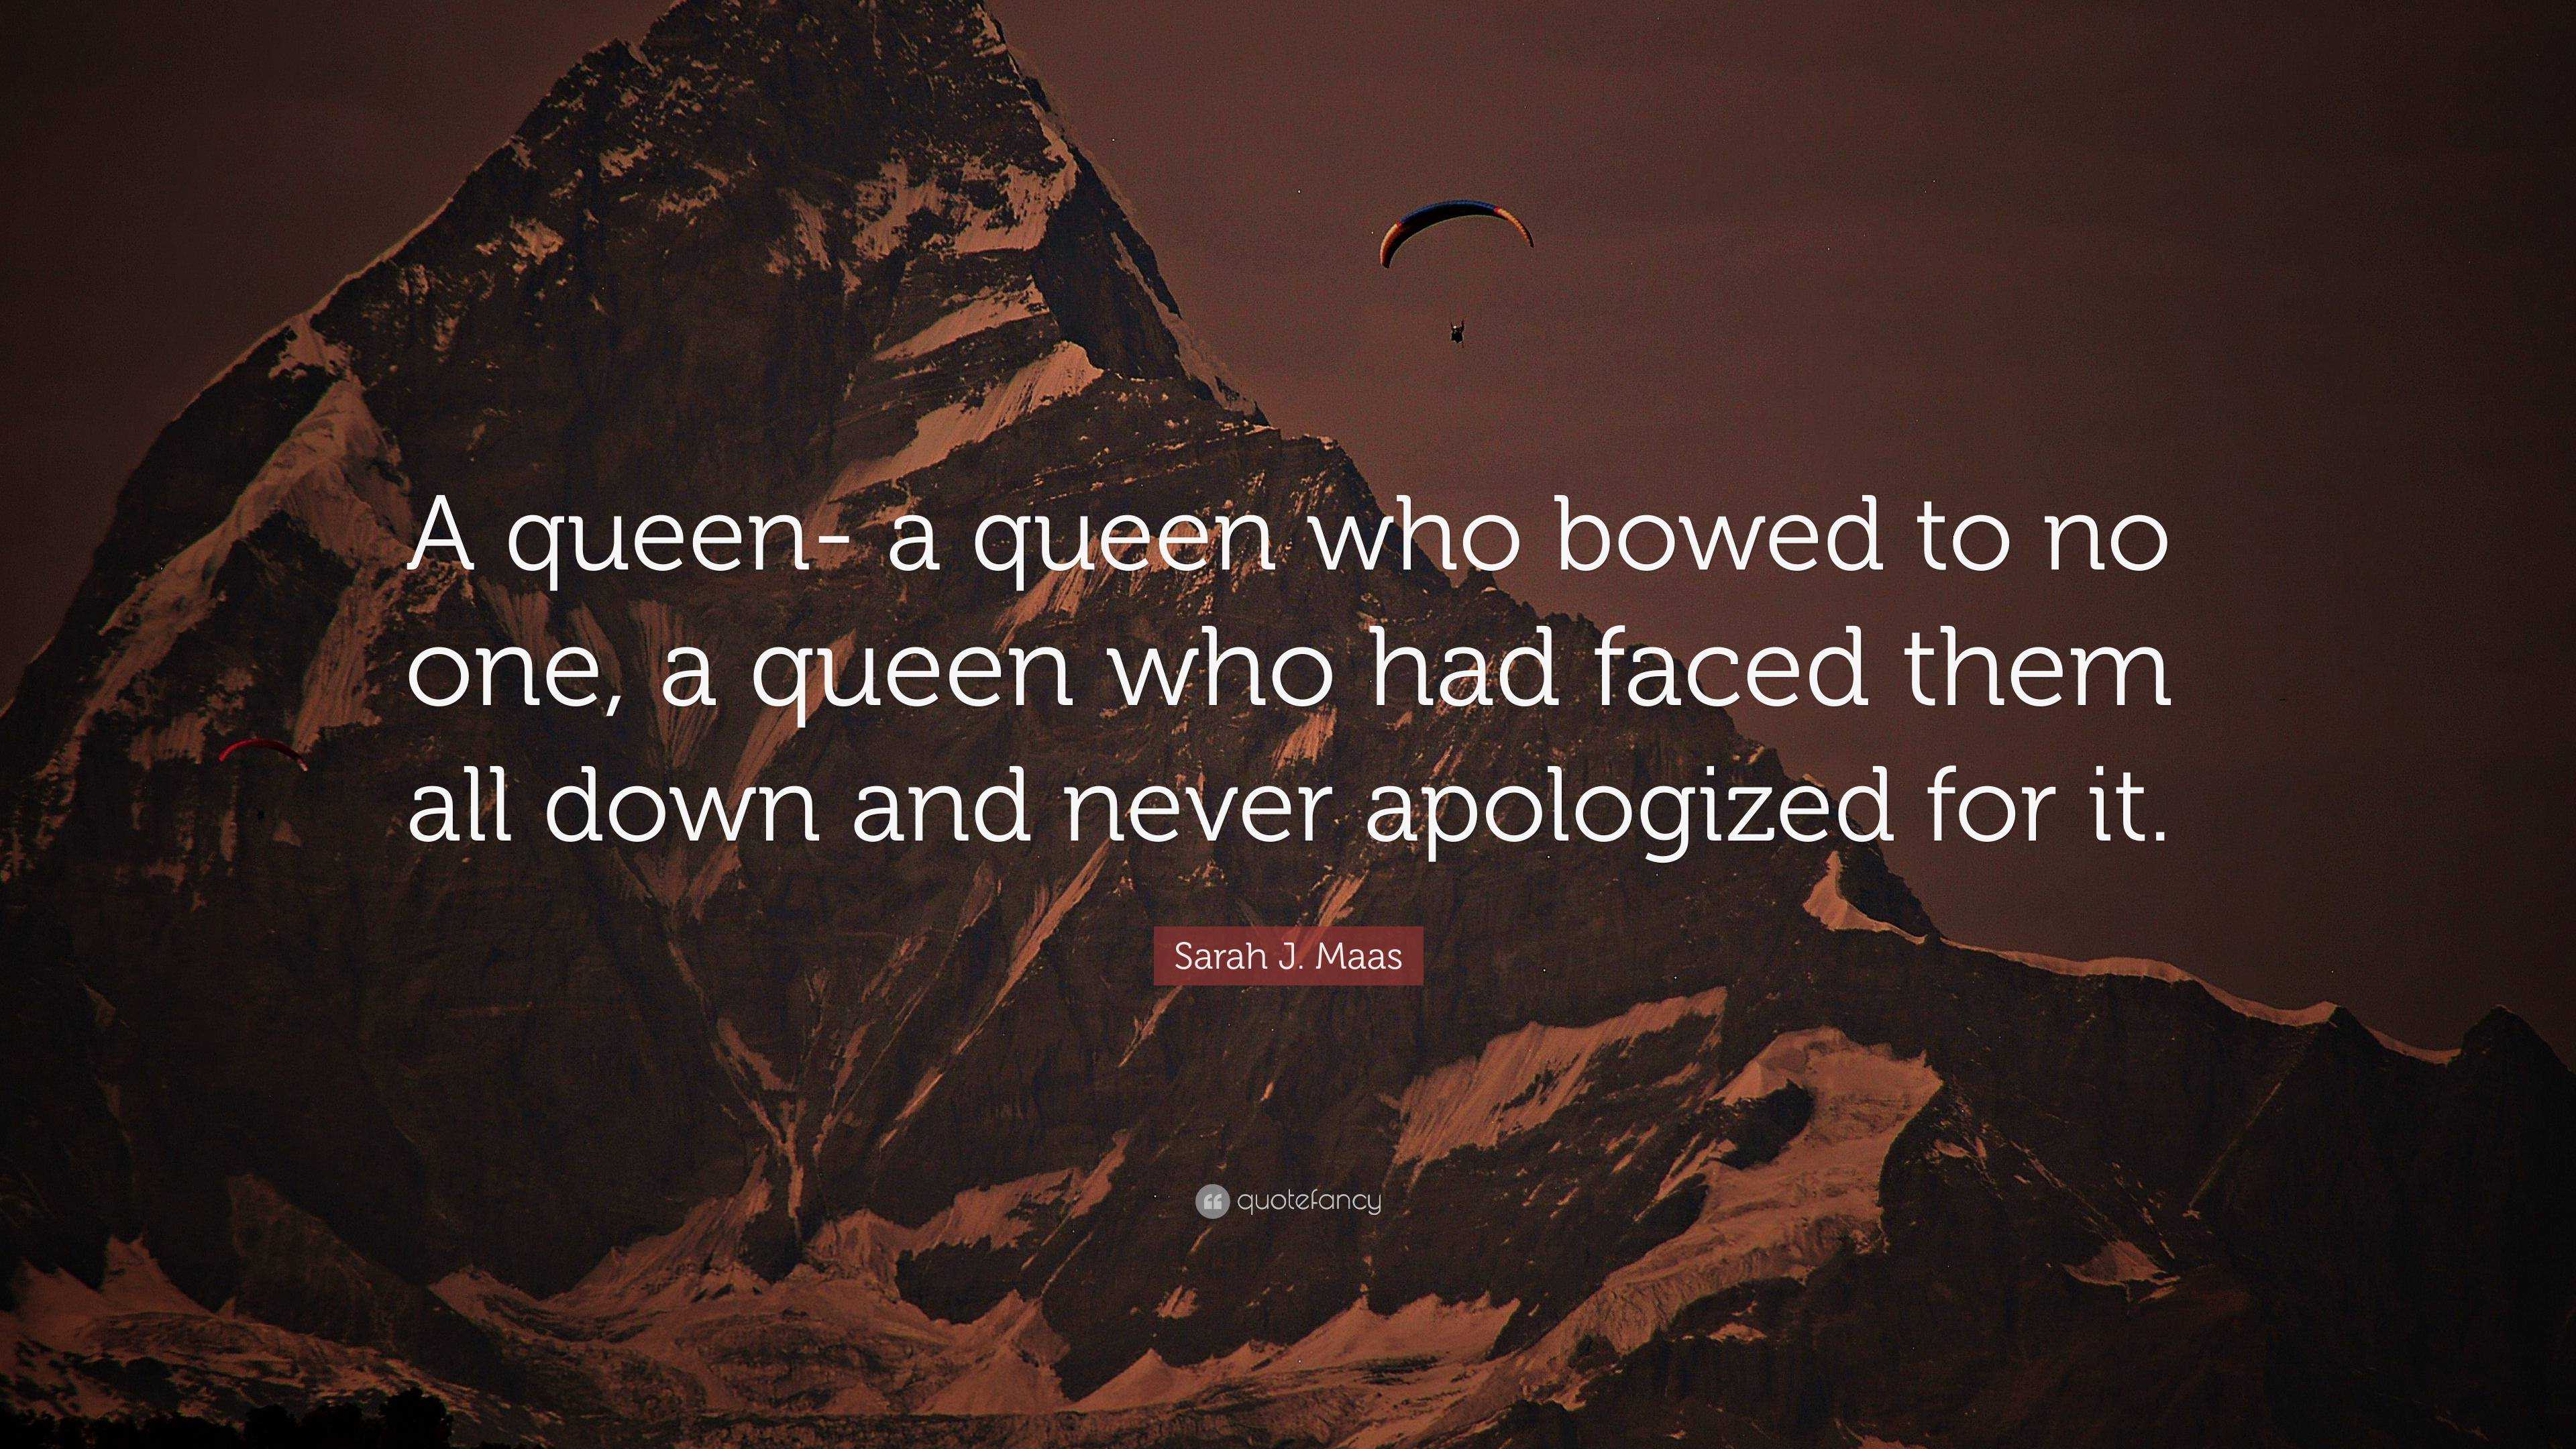 Sarah J Maas Quote A Queen A Queen Who Bowed To No One A Queen Who